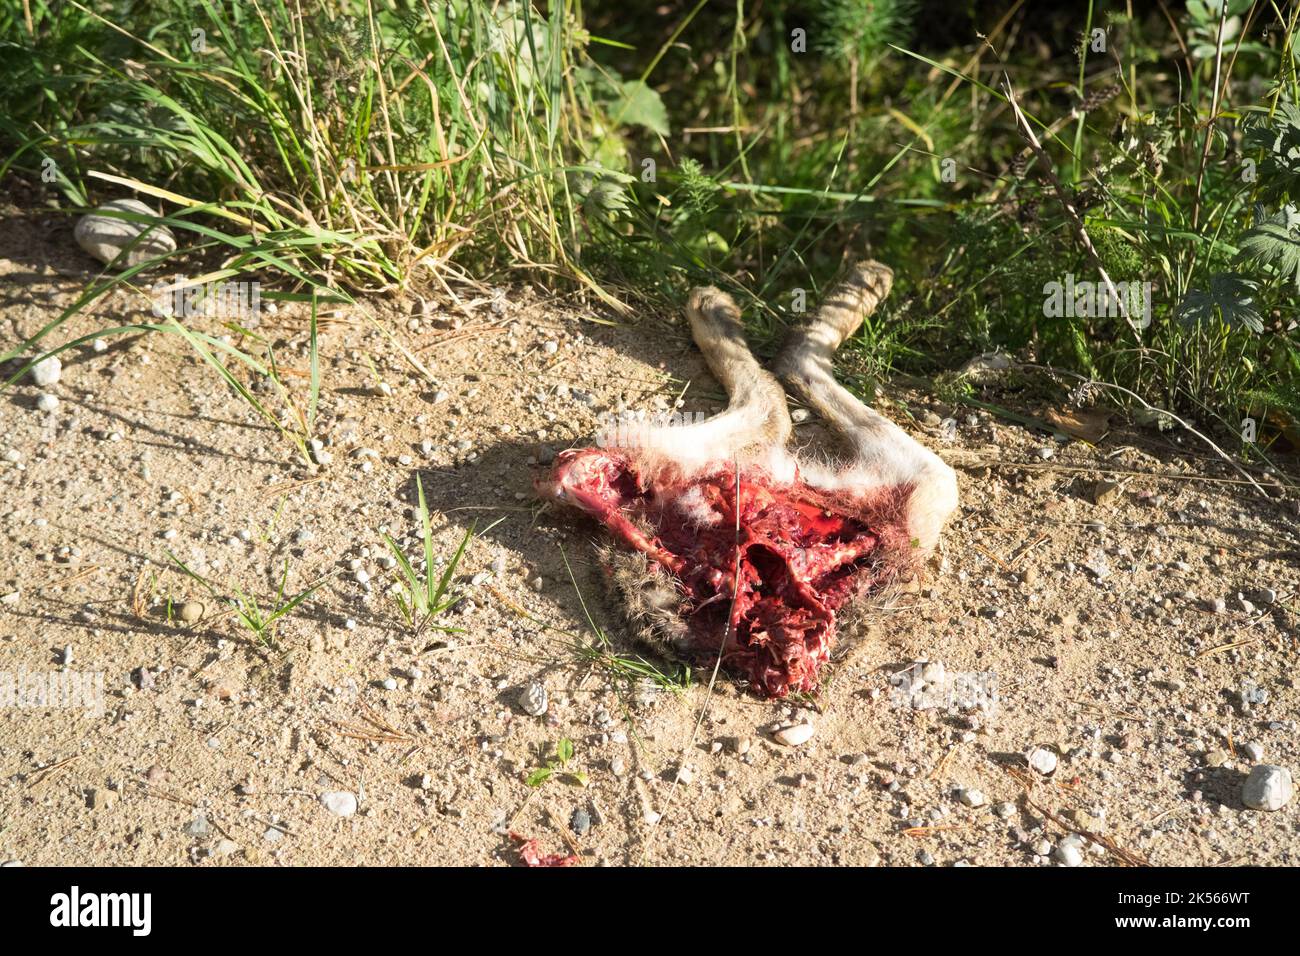 Half-eaten hare on the side of the road Stock Photo